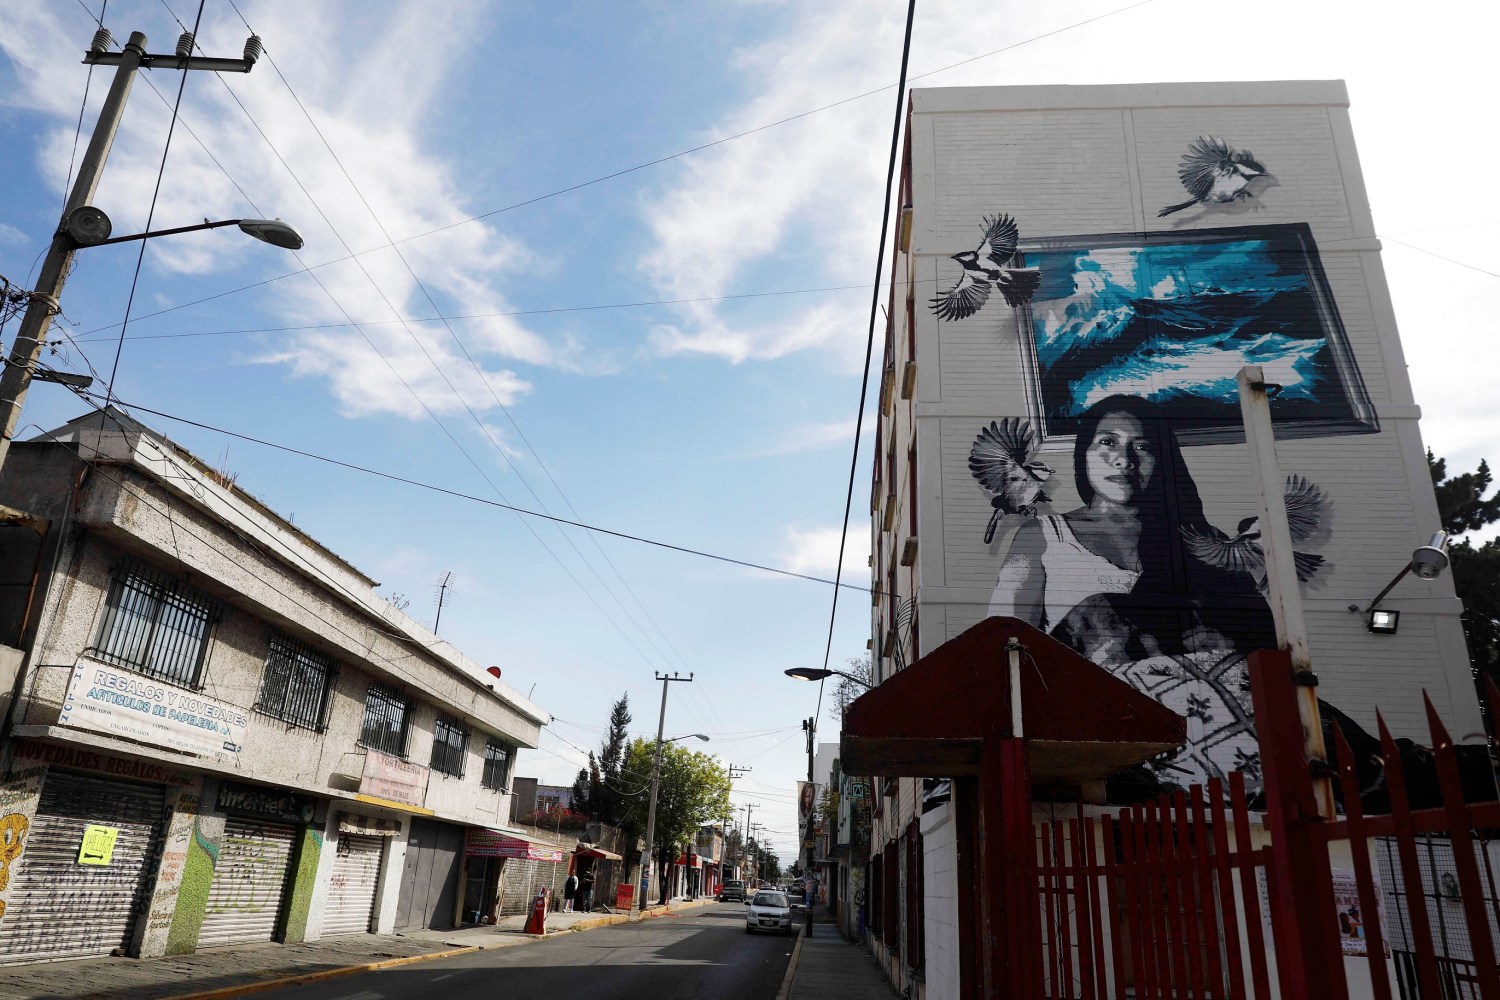 A mural depicting Yalitza Aparicio, lead actress in "Roma" movie directed by Alfonso Cuaron, is pictured in Iztapalapa neighborhood in Mexico City, Mexico, January 31, 2019. Picture taken January 31, 2019. REUTERS/Edgard Garrido - RC1FC931A680